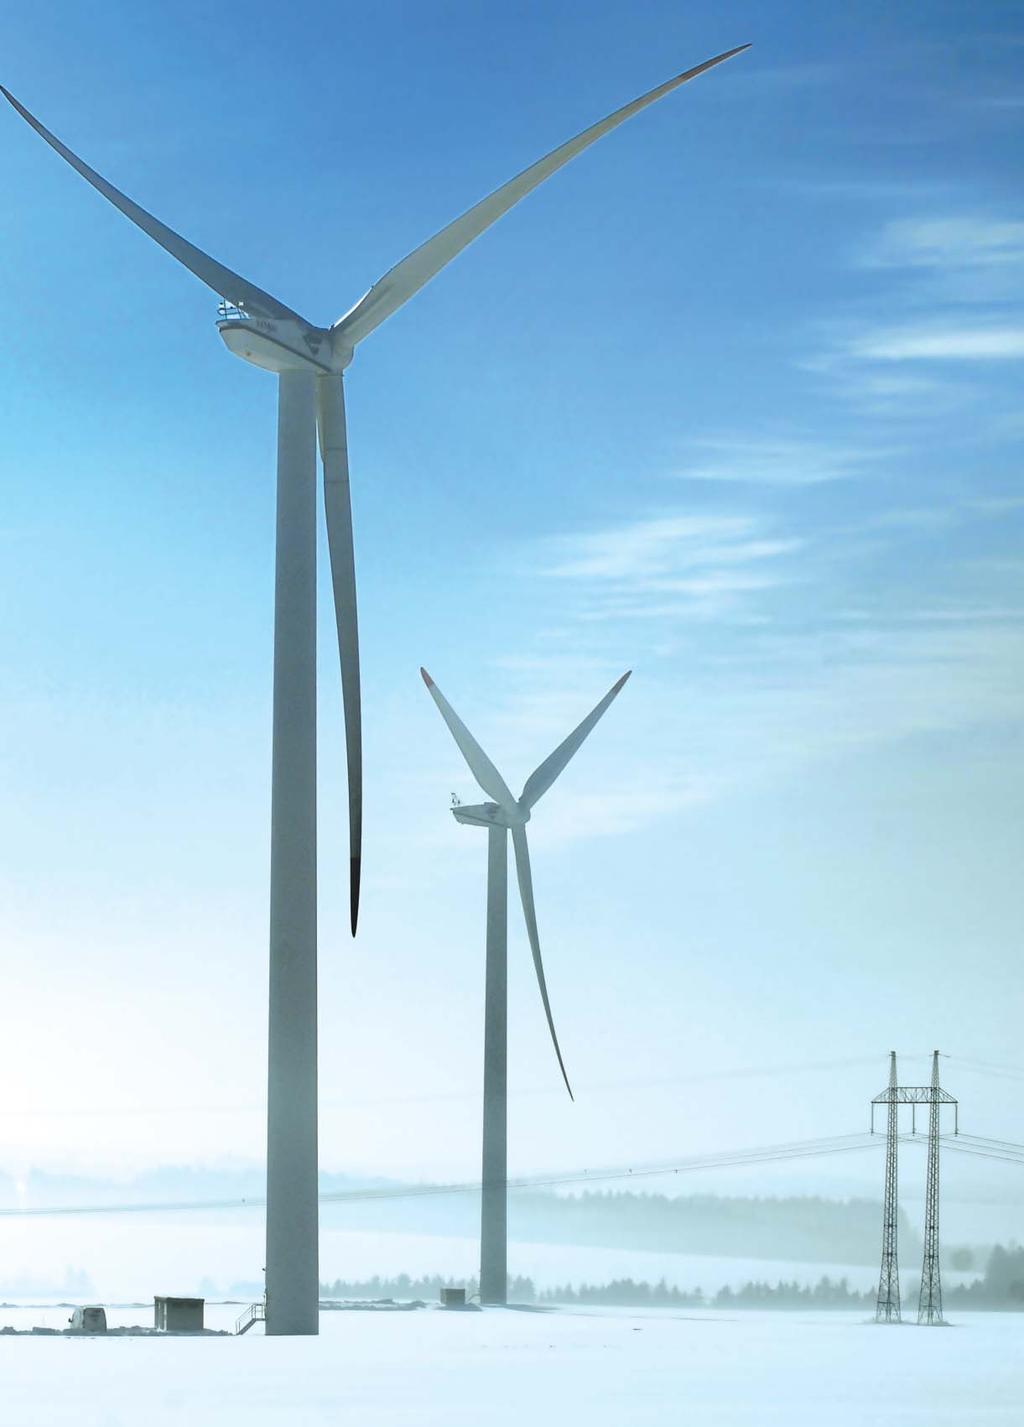 ELECTRICAL SYSTEM CONTROL OF WIND POWER PLANTS DURING NORMAL OPERATION IS DONE REMOTELY THROUGH THE REGUARD WEB INTERFACE AND THEIR OPERATION IS VIRTUALLY AUTOMATIC.